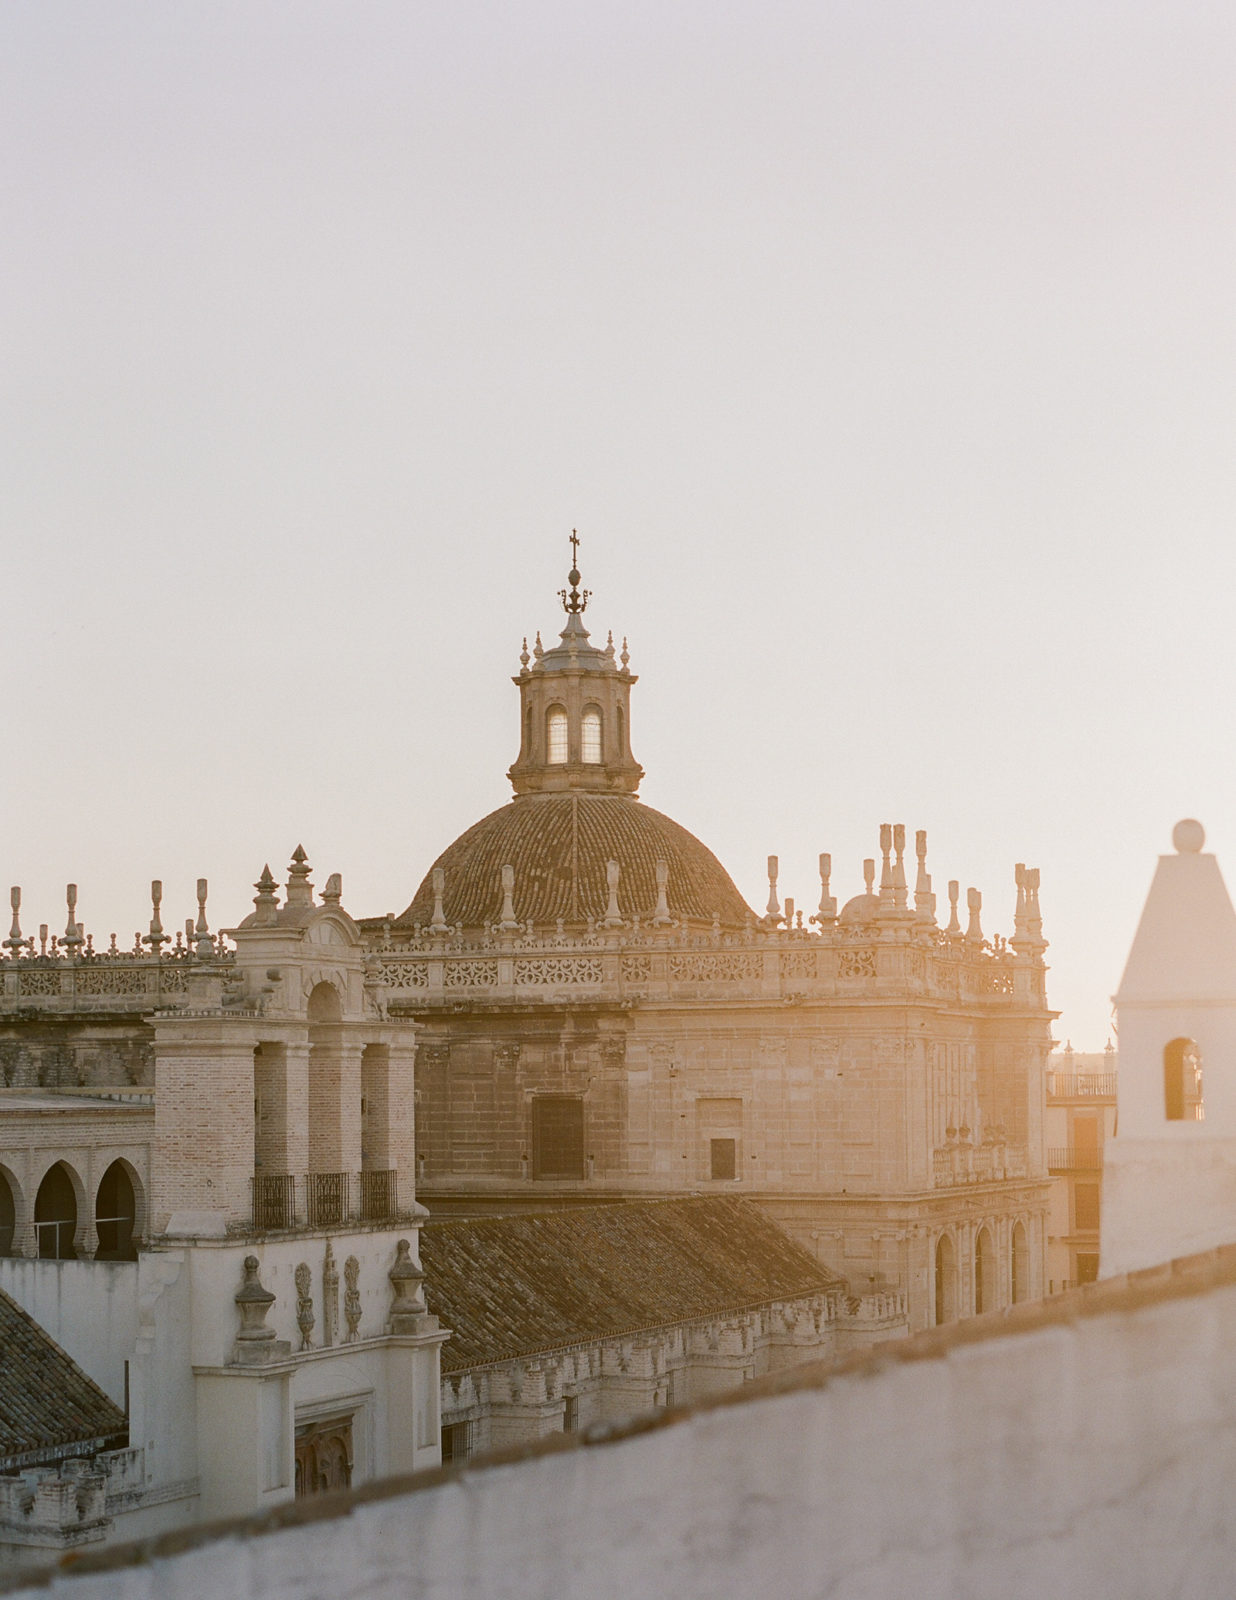 Seville Wedding Photographer | Seville Luxury Travel Guide | Spain Wedding Photography | Europe Film Photographer | Seville Architecture | Molly Carr Photography